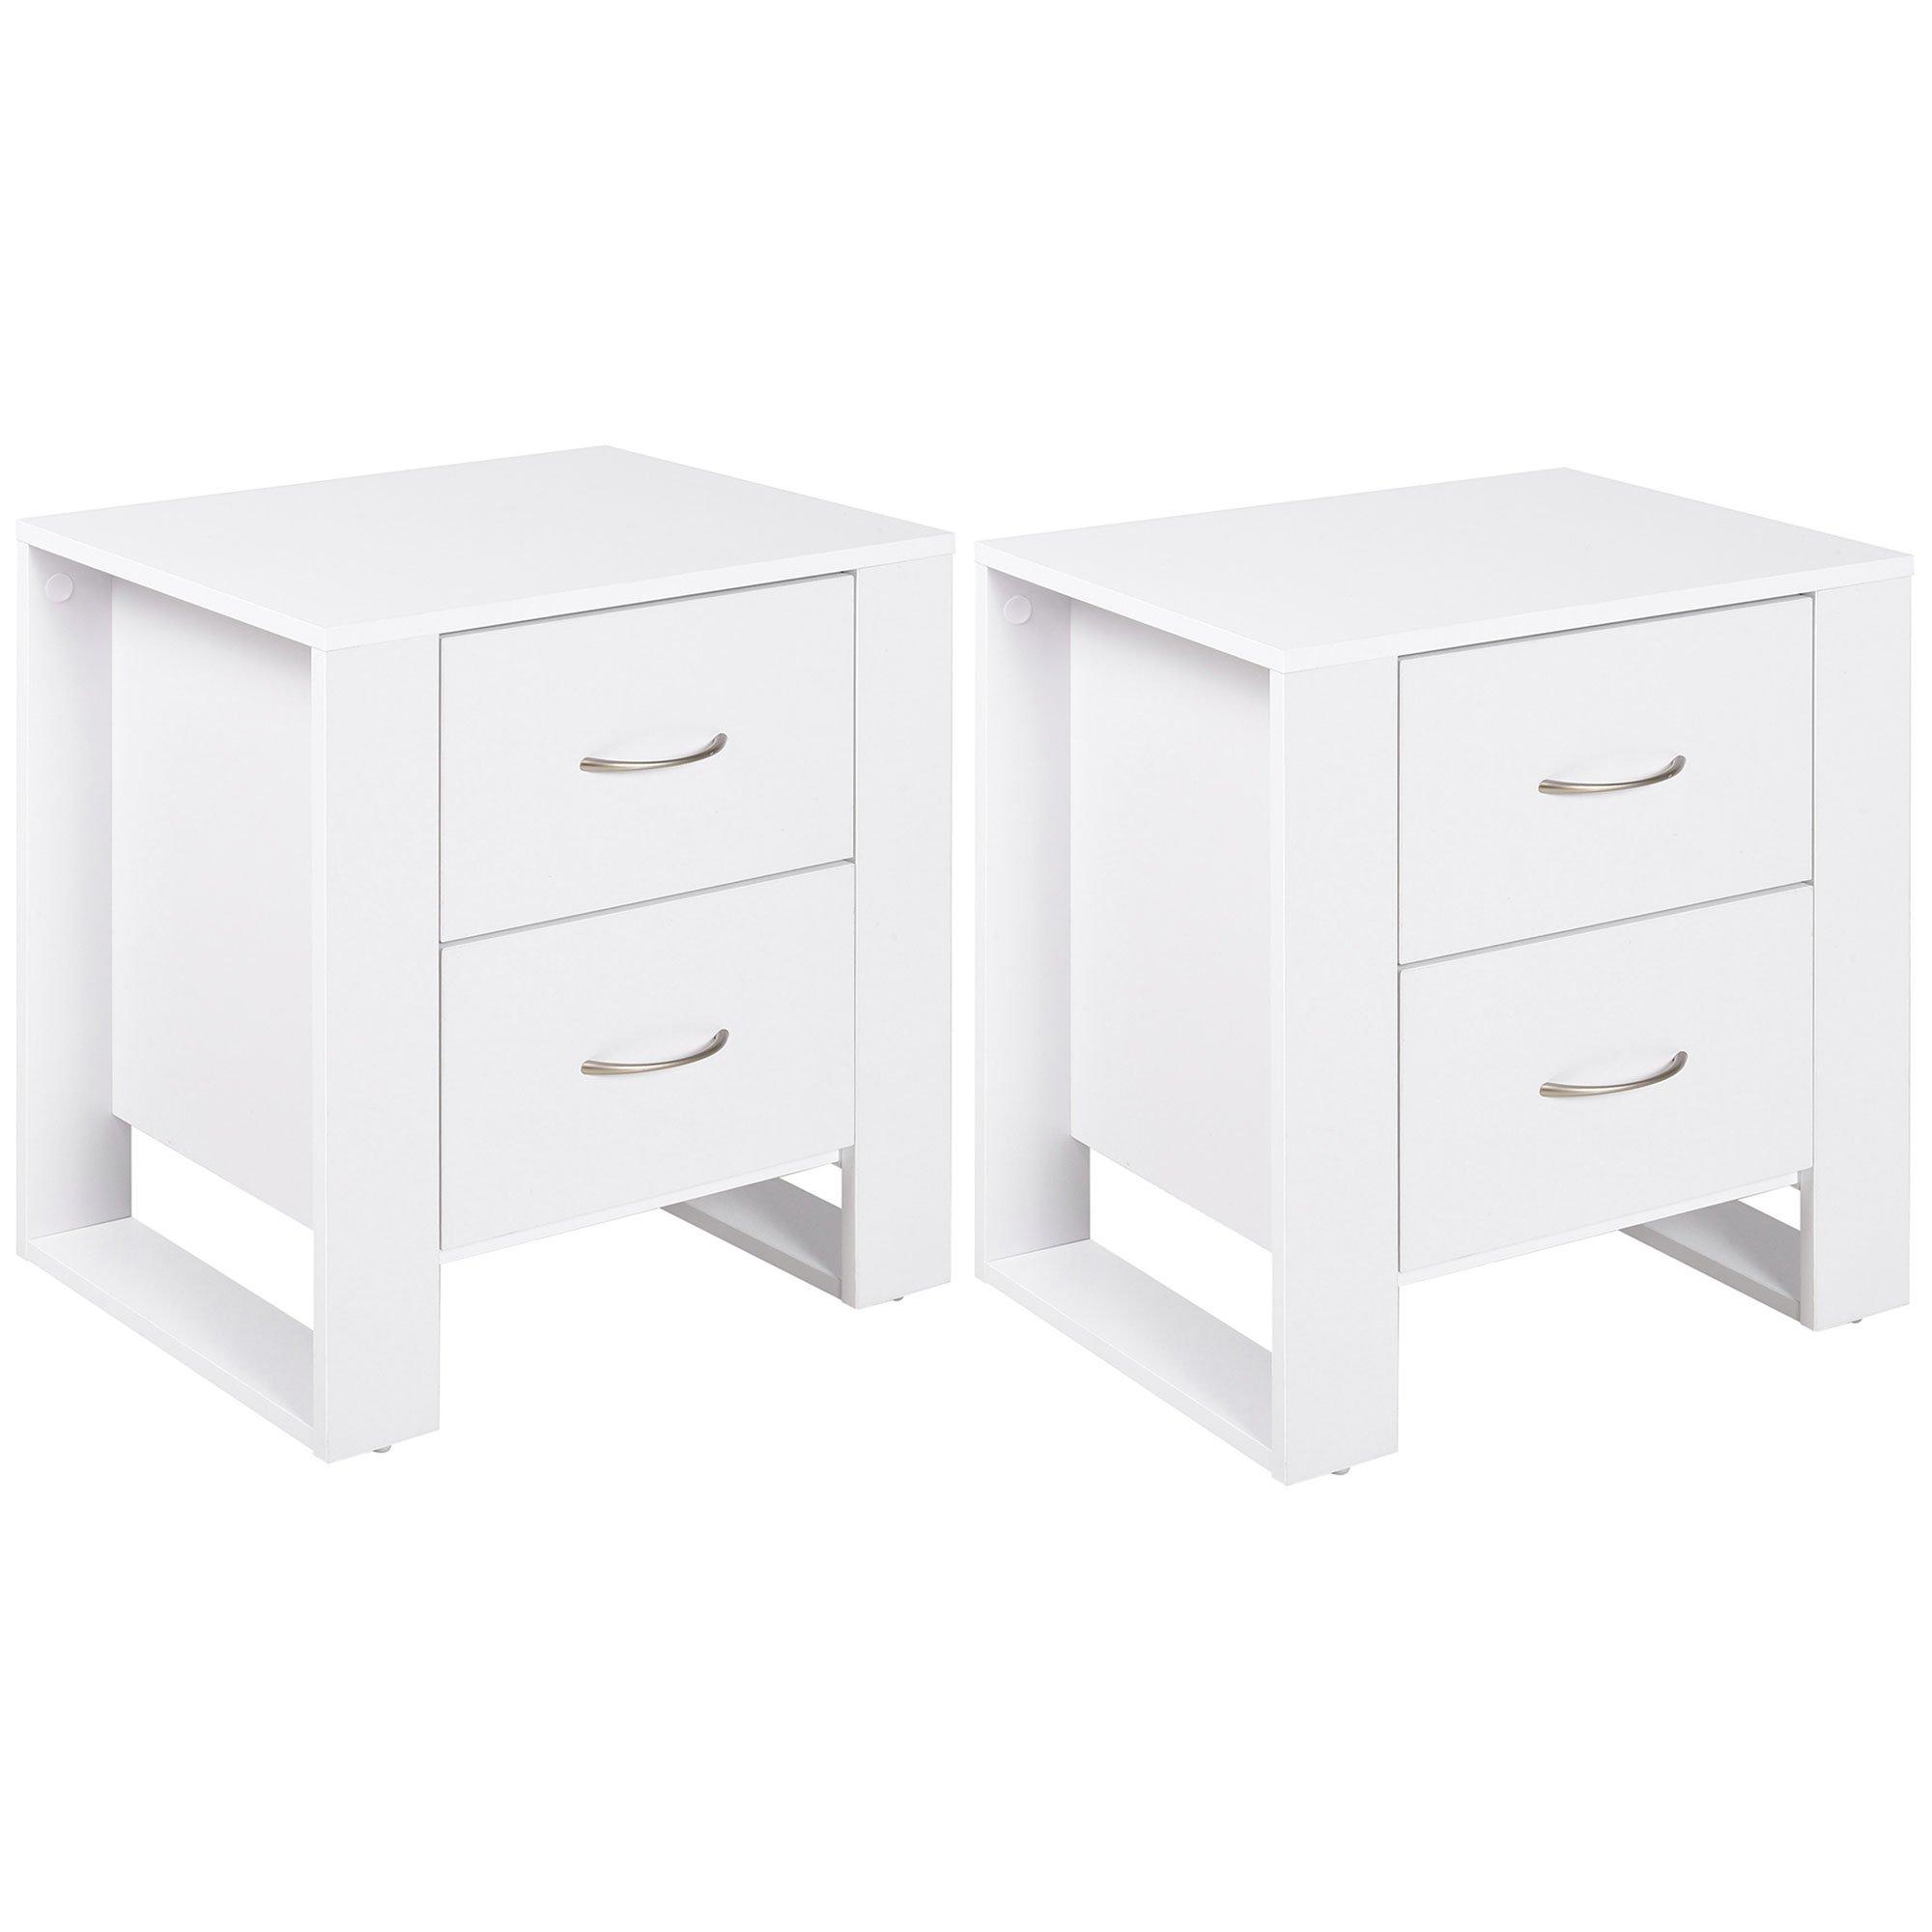 2 Drawer Boxy Bedside Table Nightstand with Elevated Base Stylish